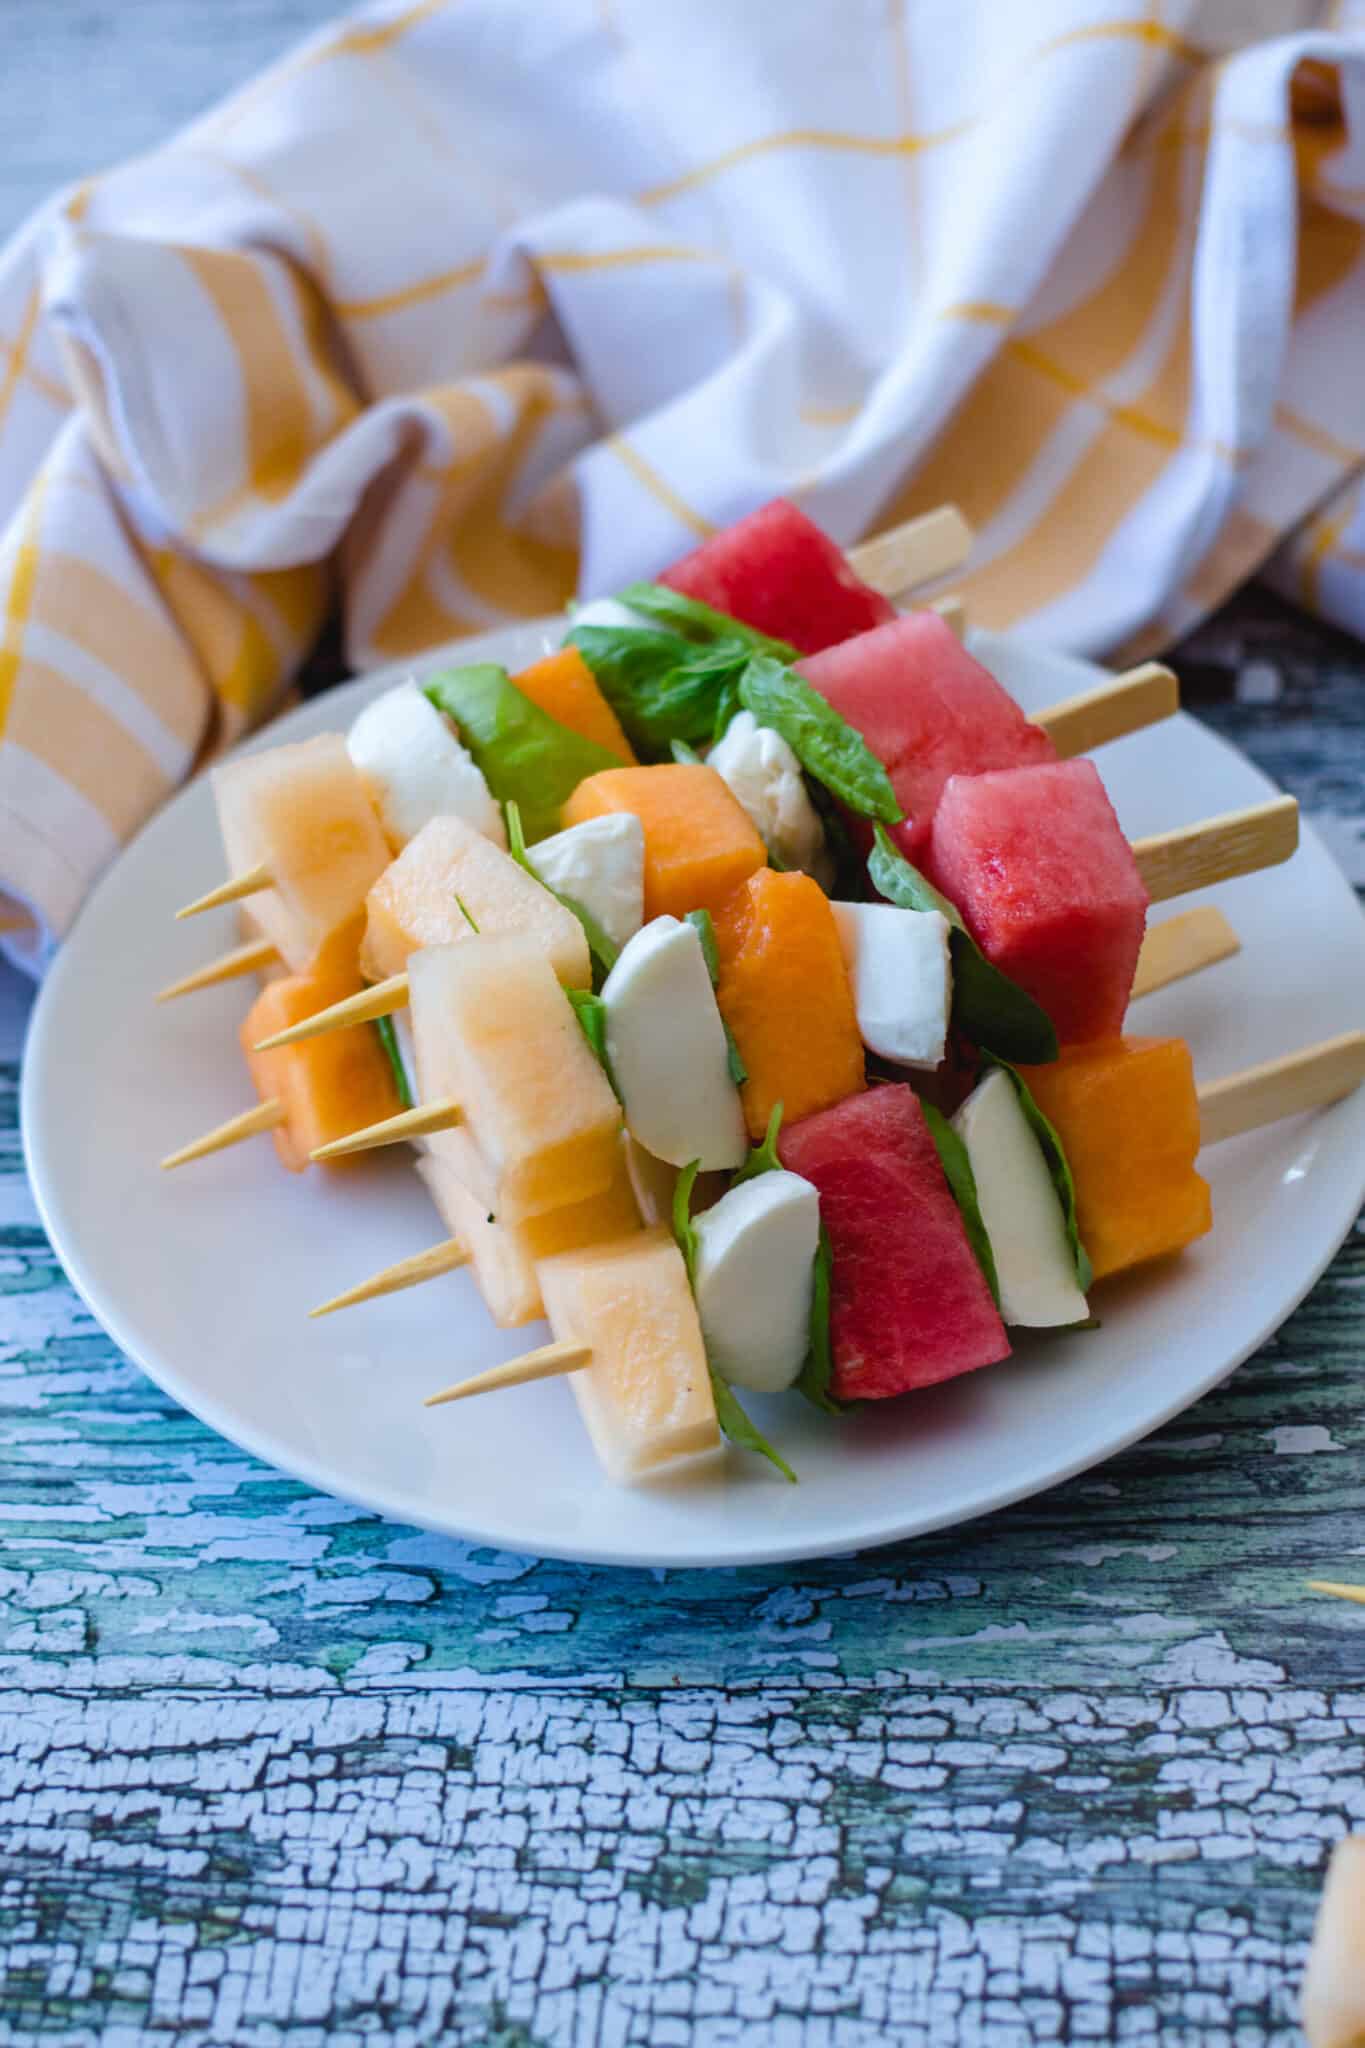 Caprese-Style Melon and Bocconcini Skewers